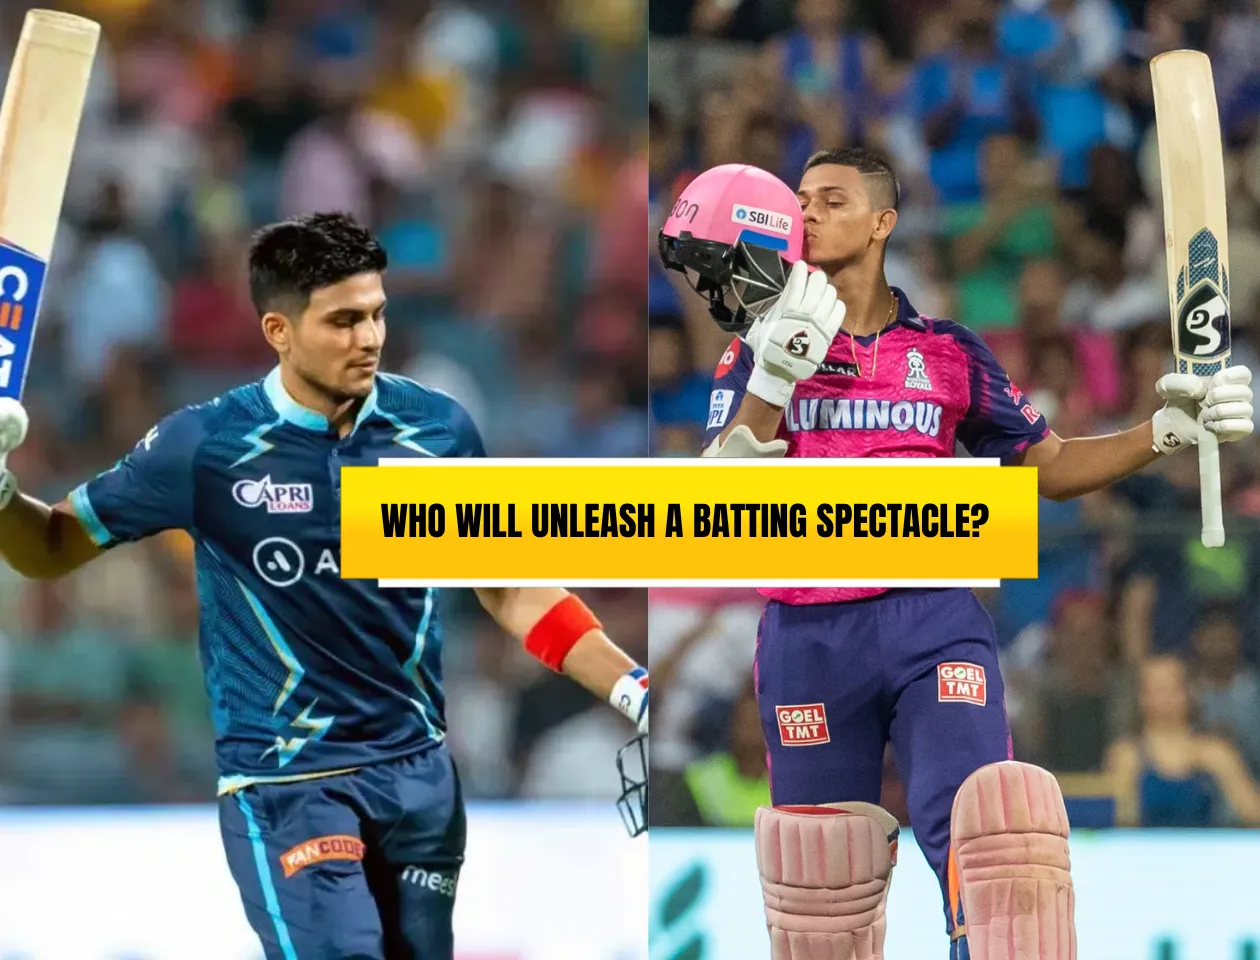 Who will unleash a batting spectal?